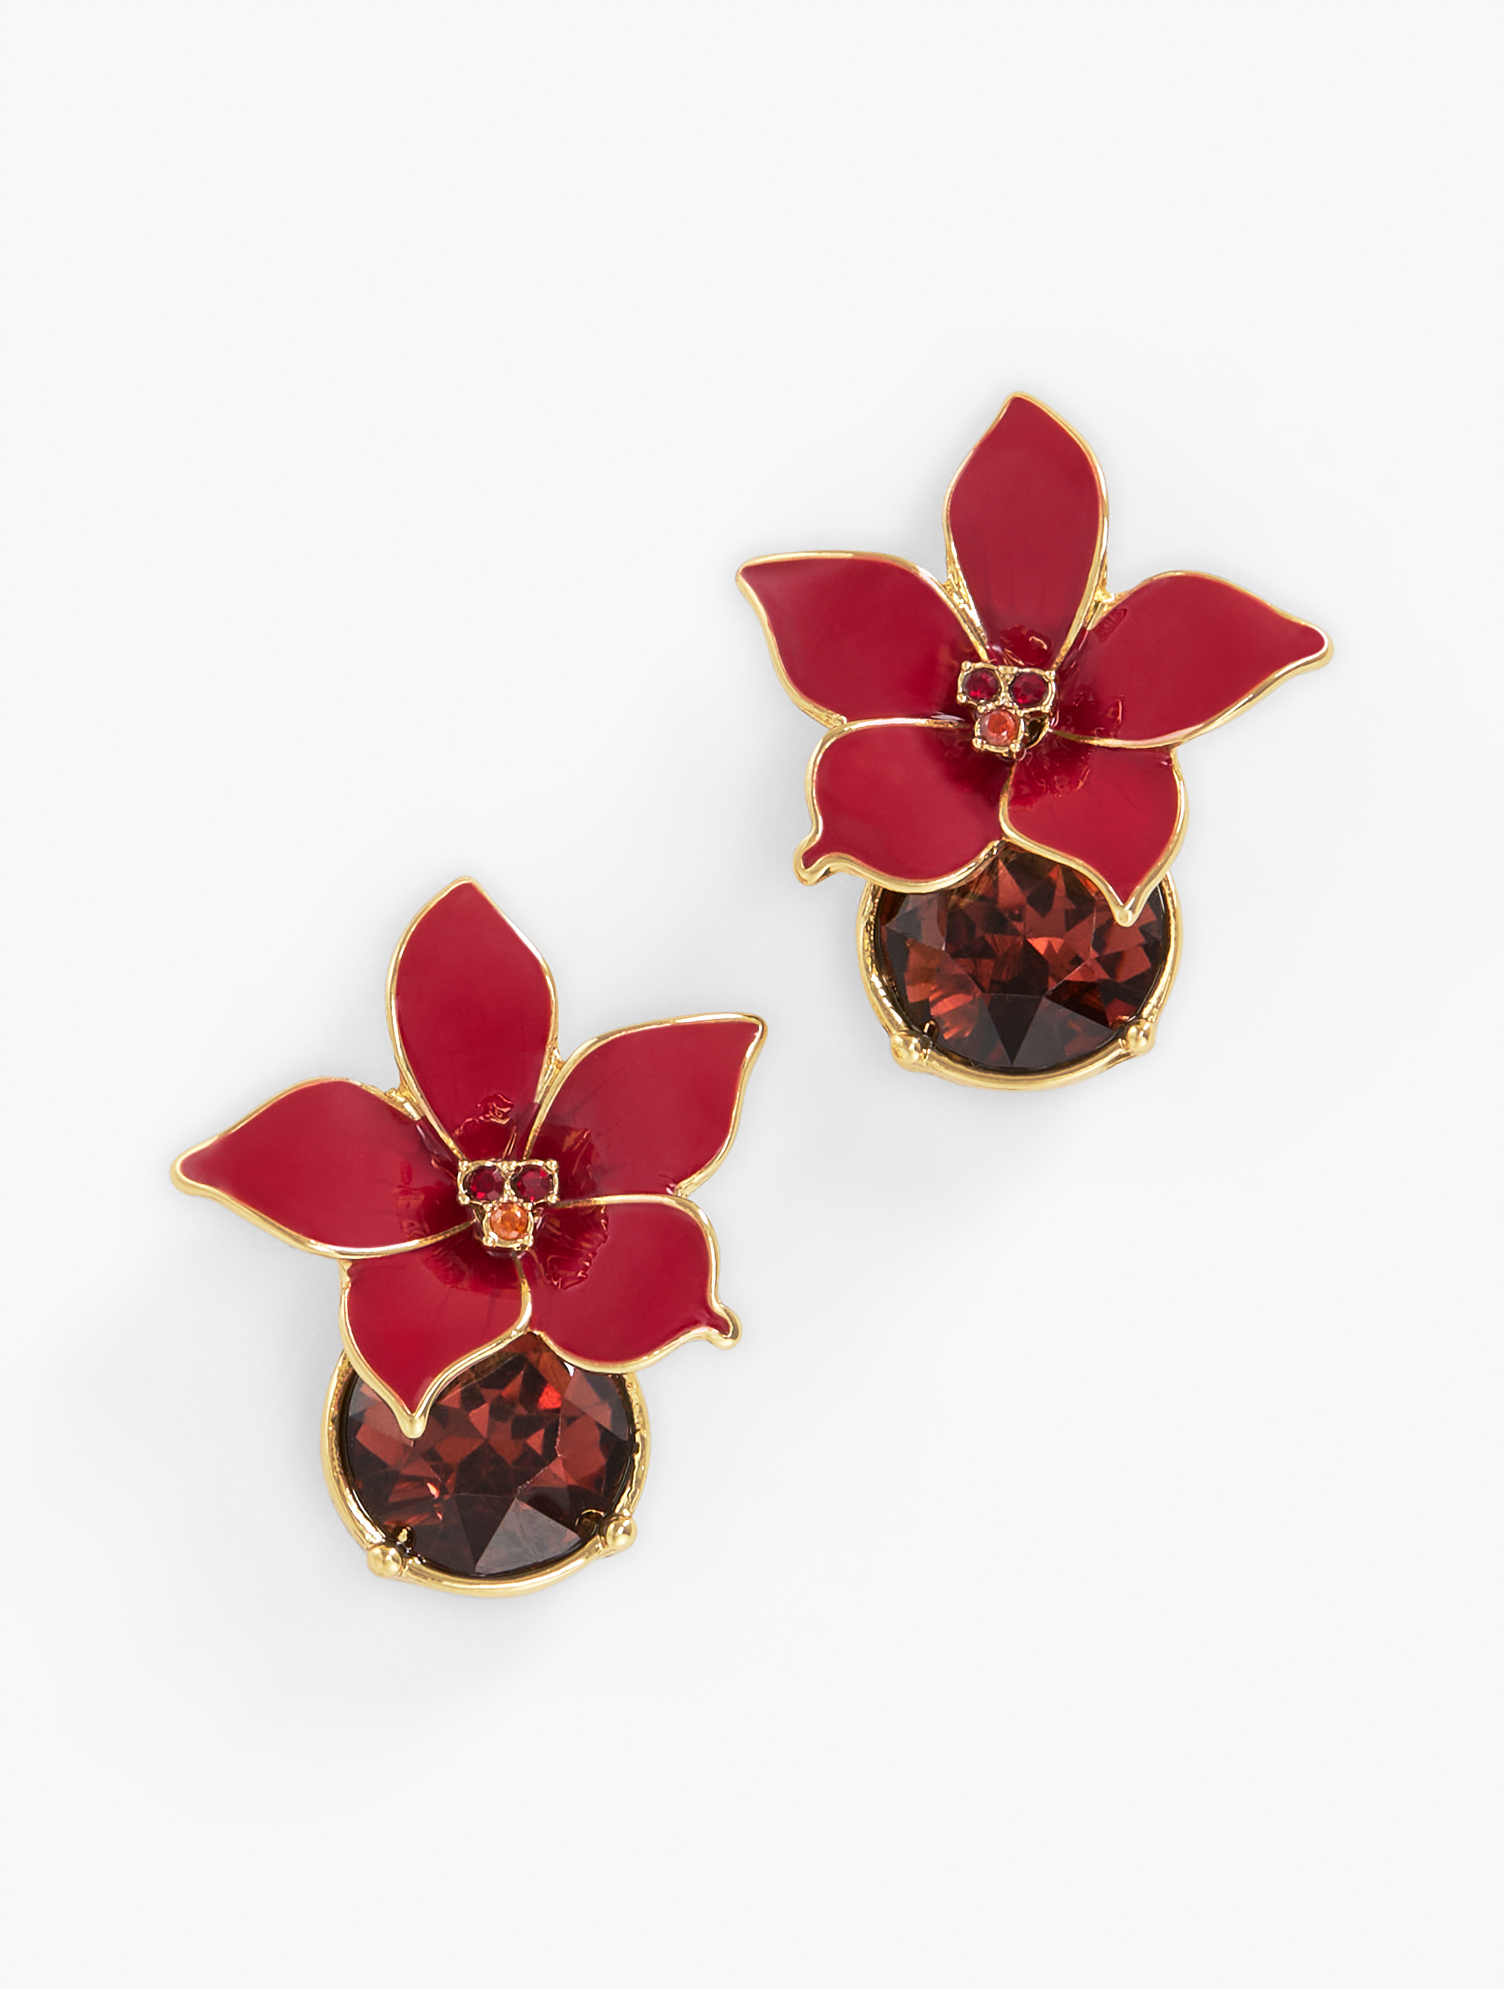 Talbots Poinsettia Drop Earrings - Red/gold - 001  In Red,gold